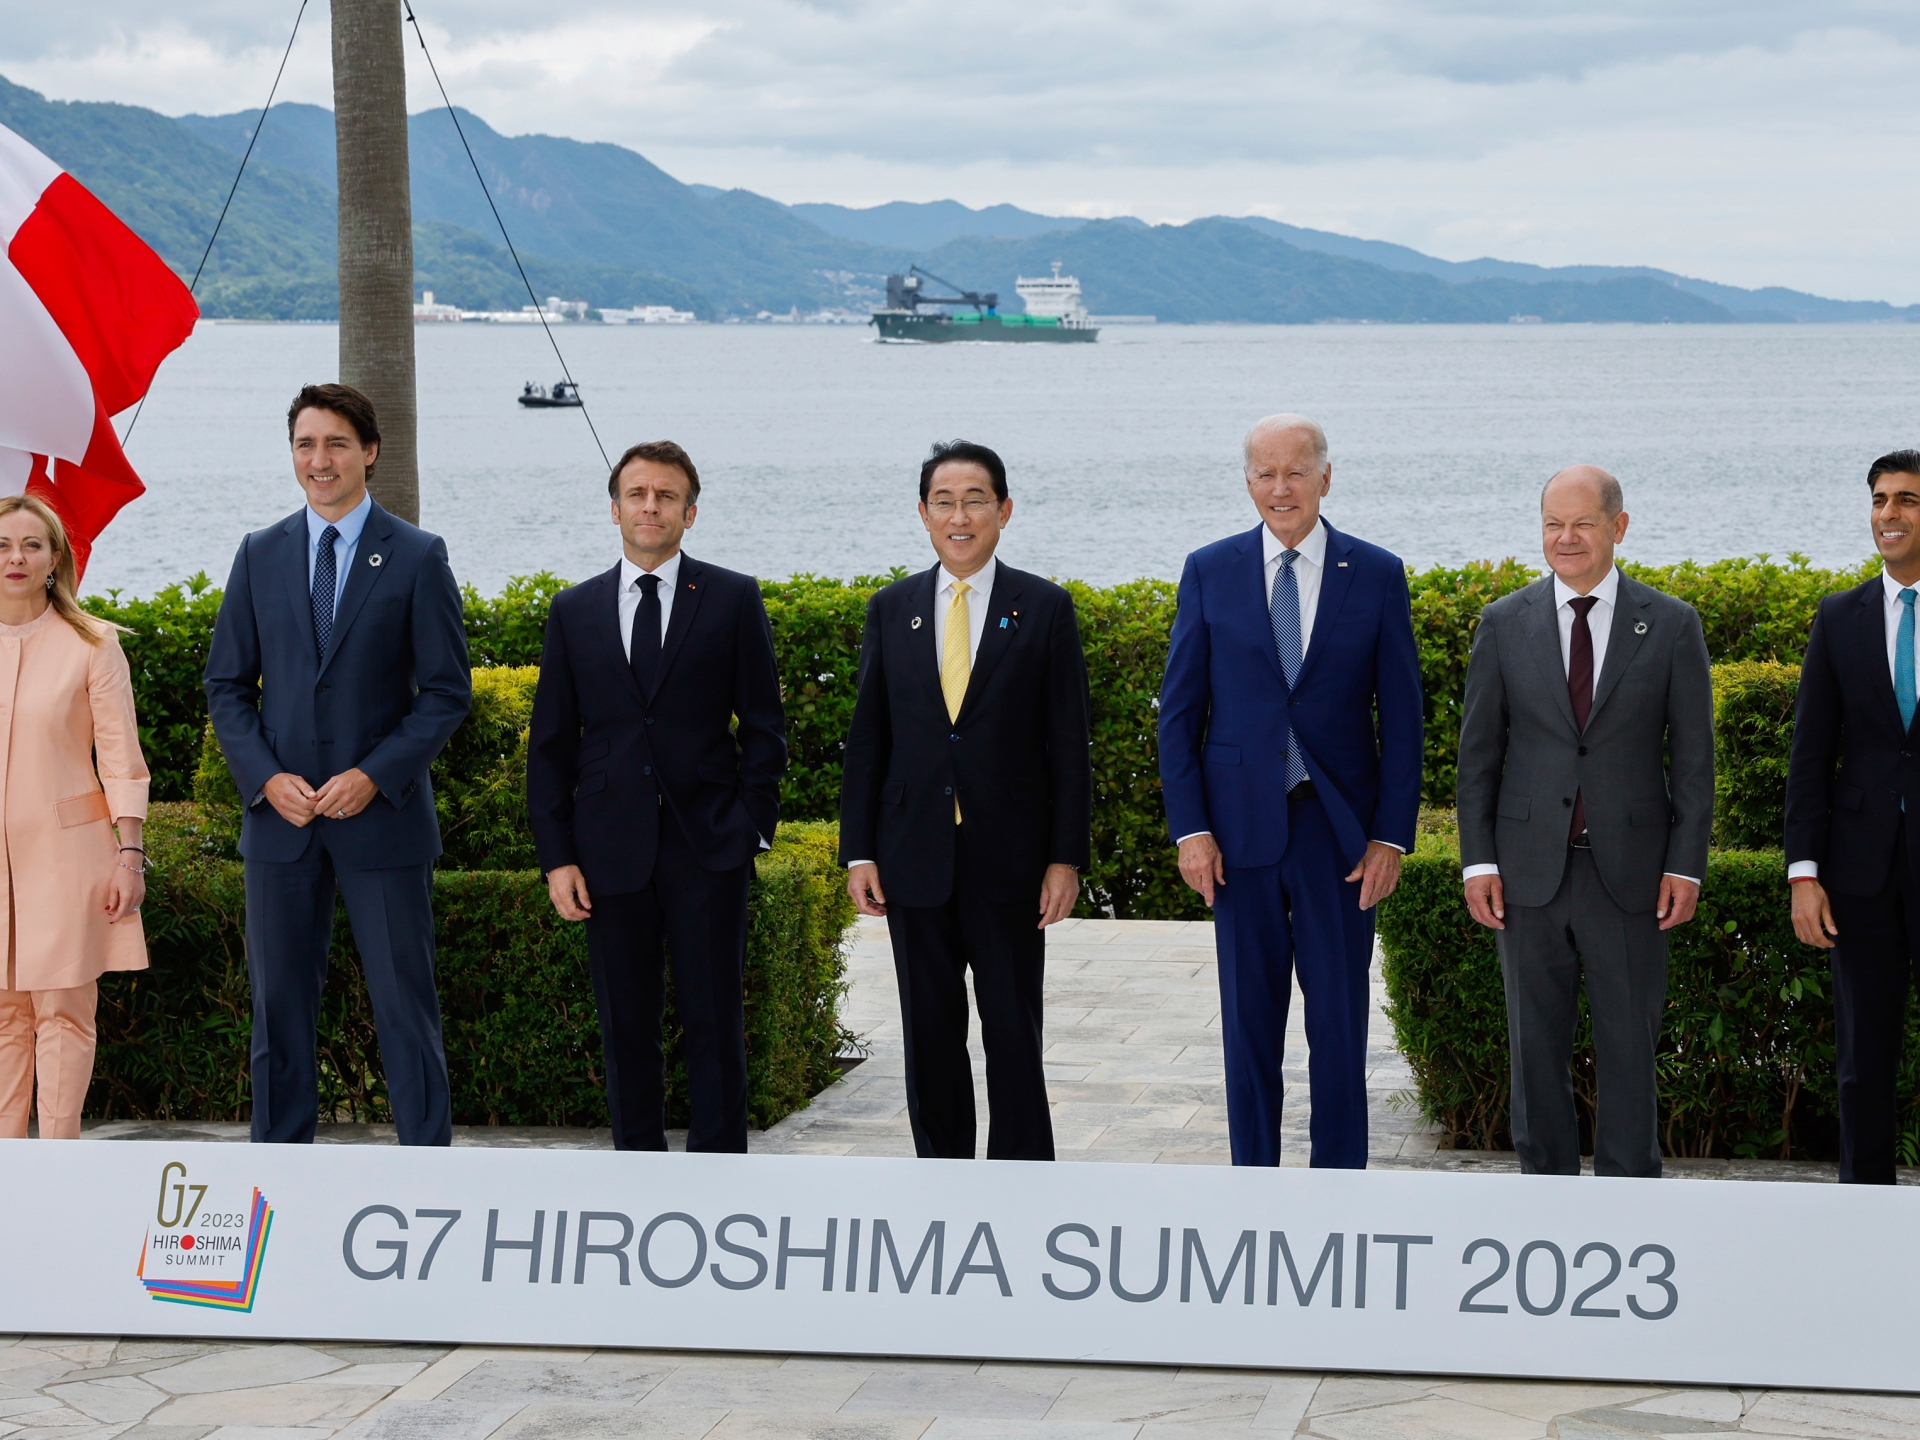 G7 leaders pose for a photo in Hiroshima, Japan.